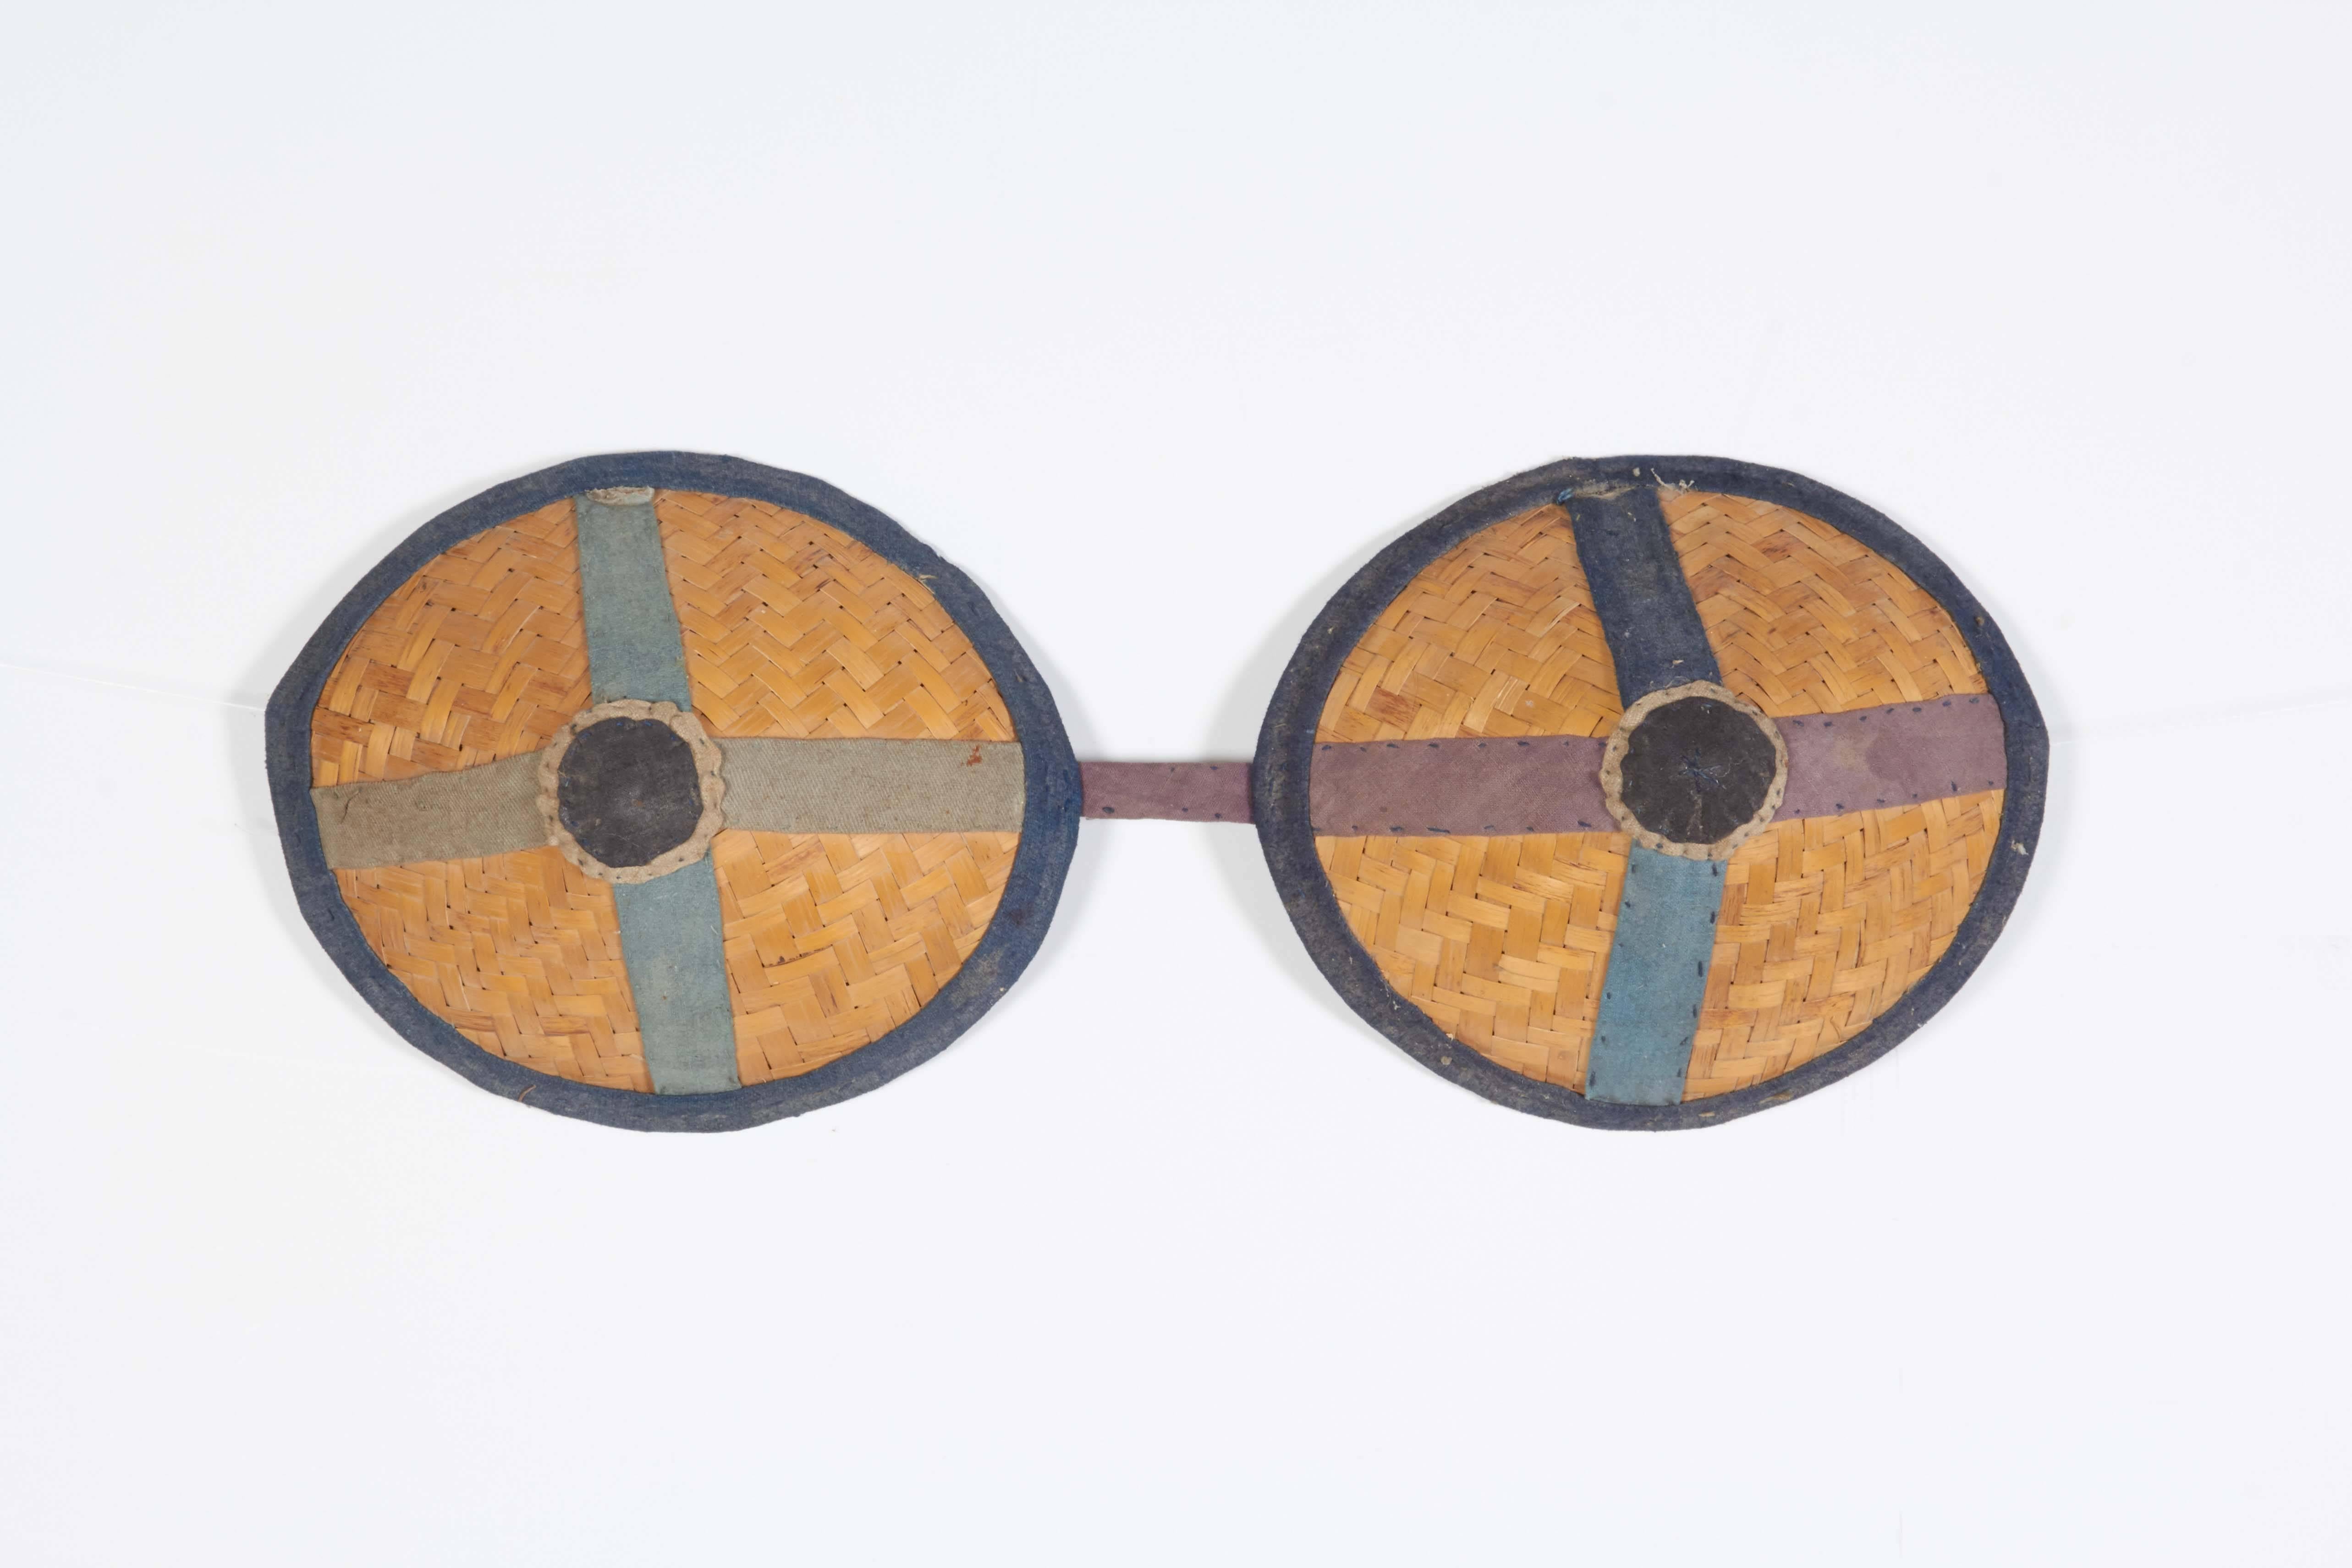 A striking pair of antique Chinese donkey blinders. Often confused with an item of women's apparel, these are in fact beautifully handwoven and hand-stitched pieces used to cover a donkey's eyes to prevent dizziness while walking in circles. Rarely